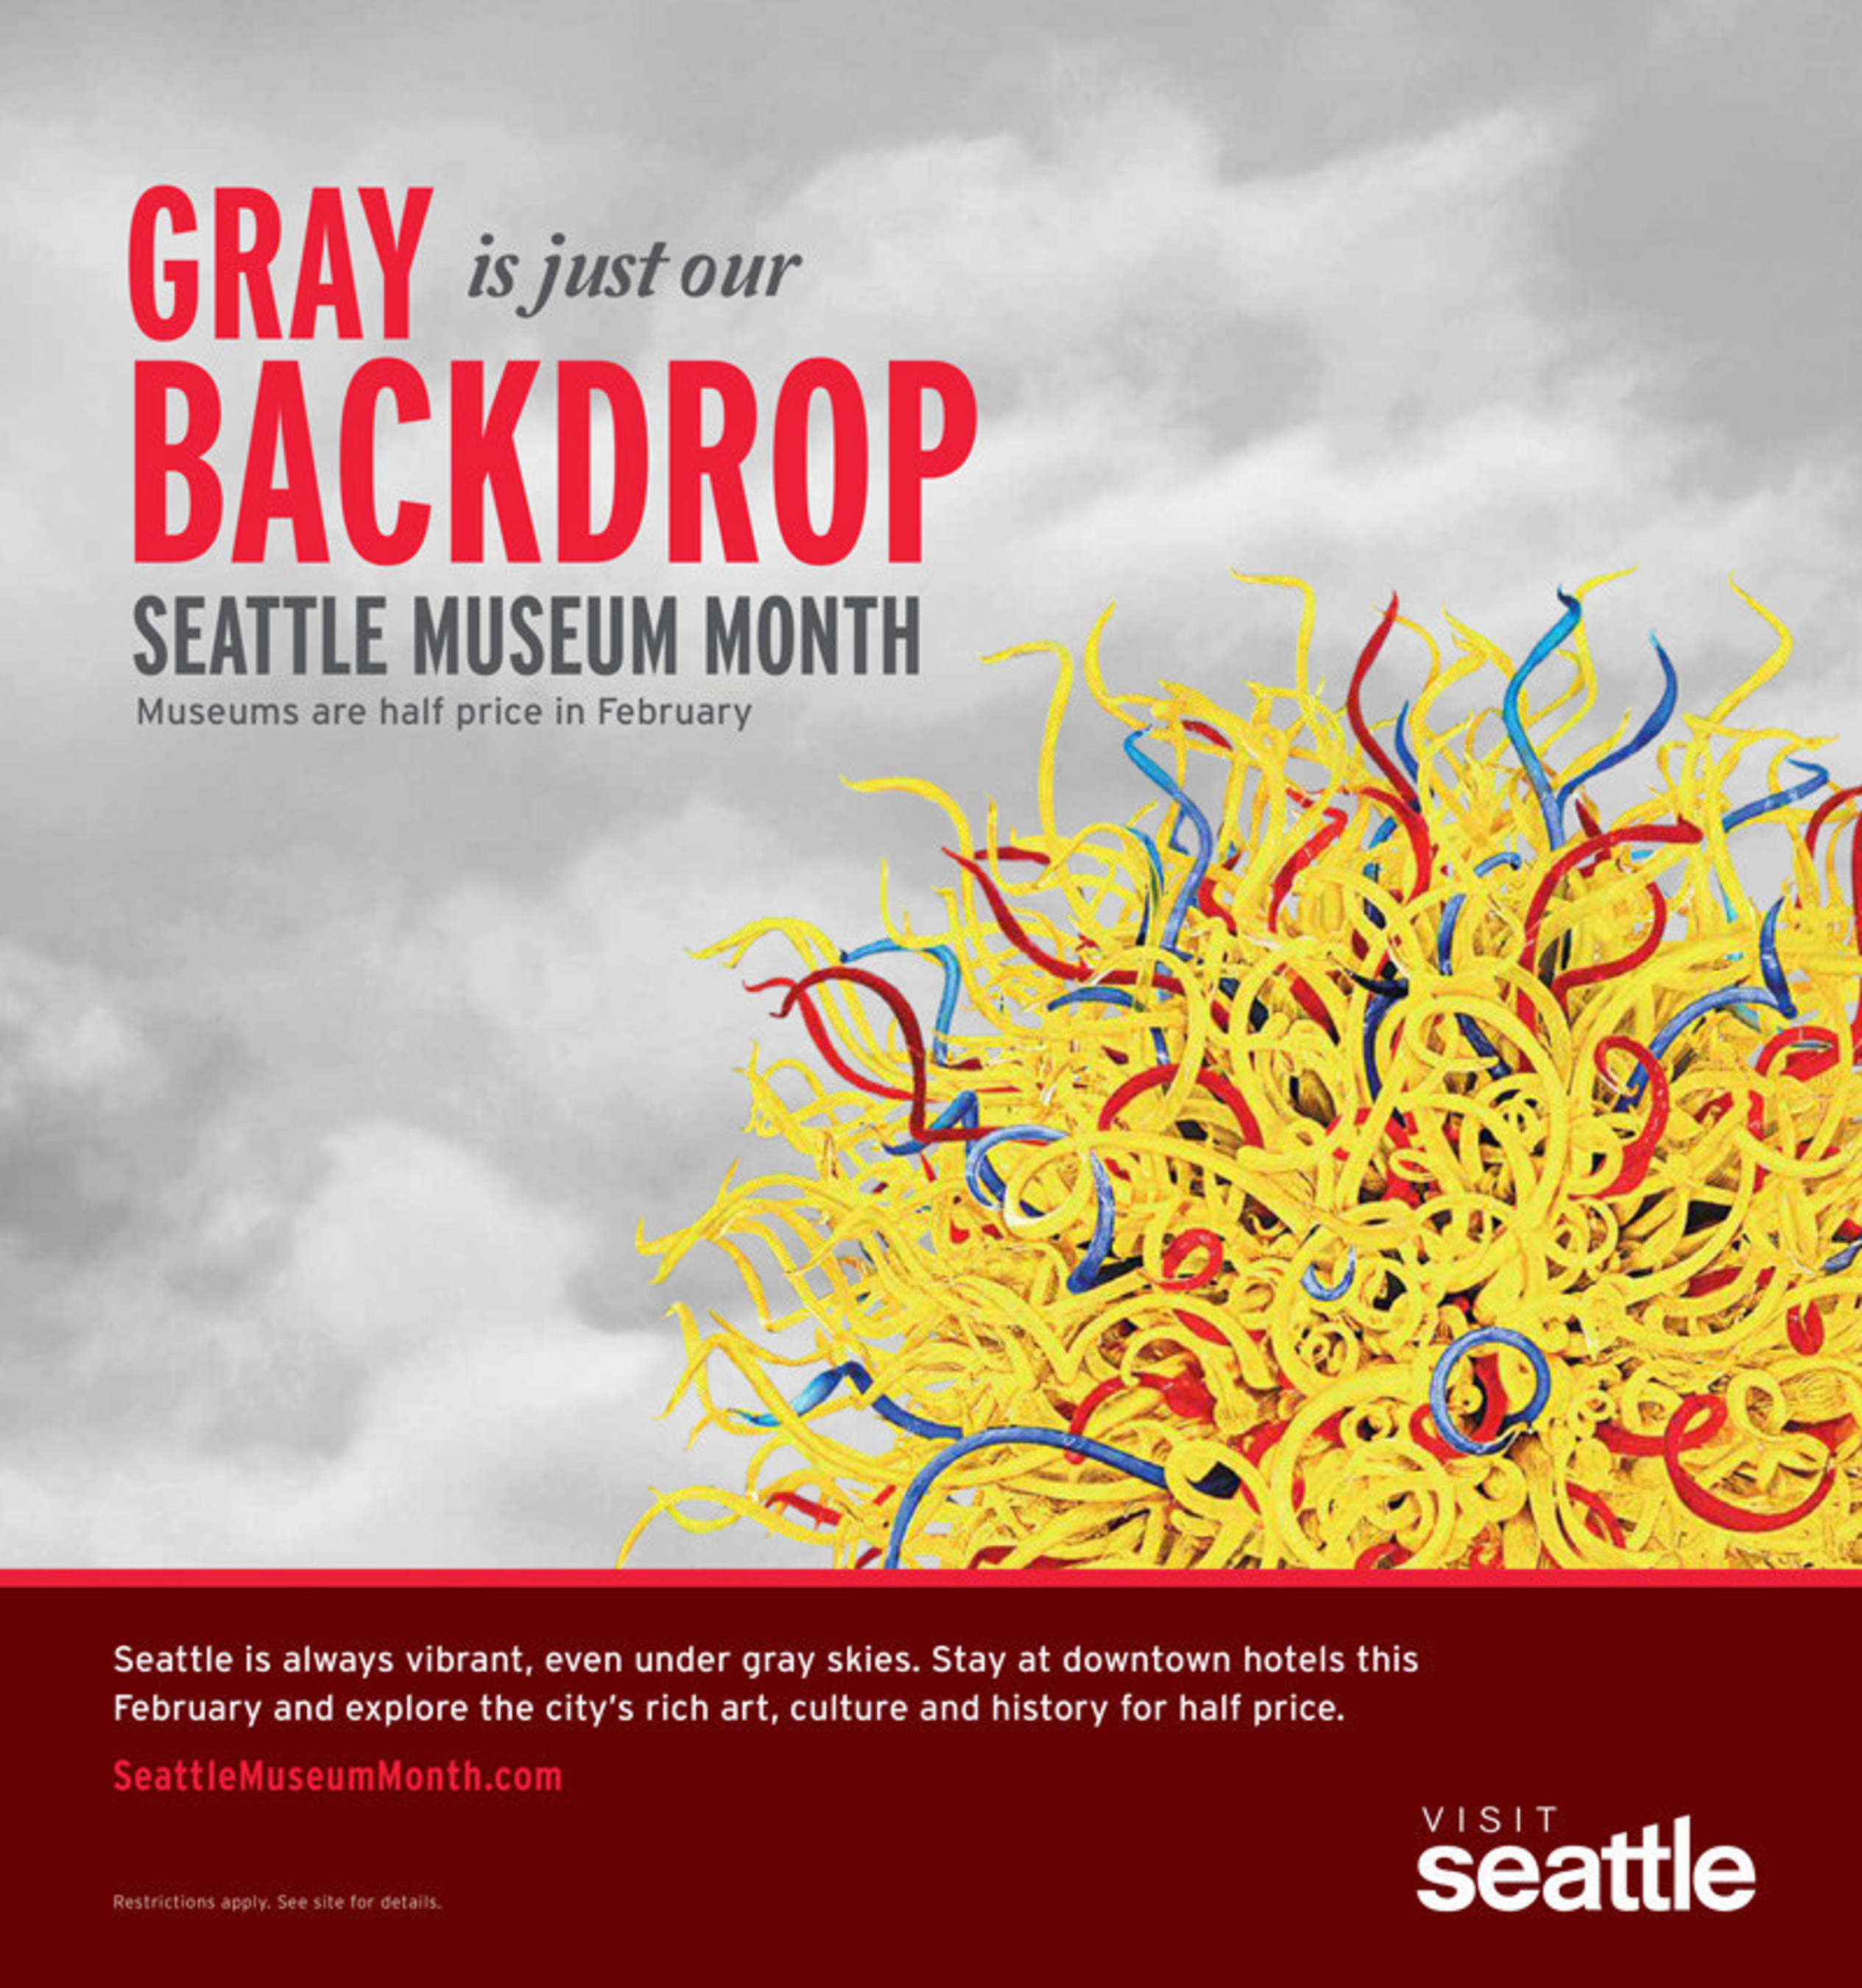 Stay at a downtown Seattle hotel and explore museums for half price with Seattle Museum Month, February 1-28, 2015